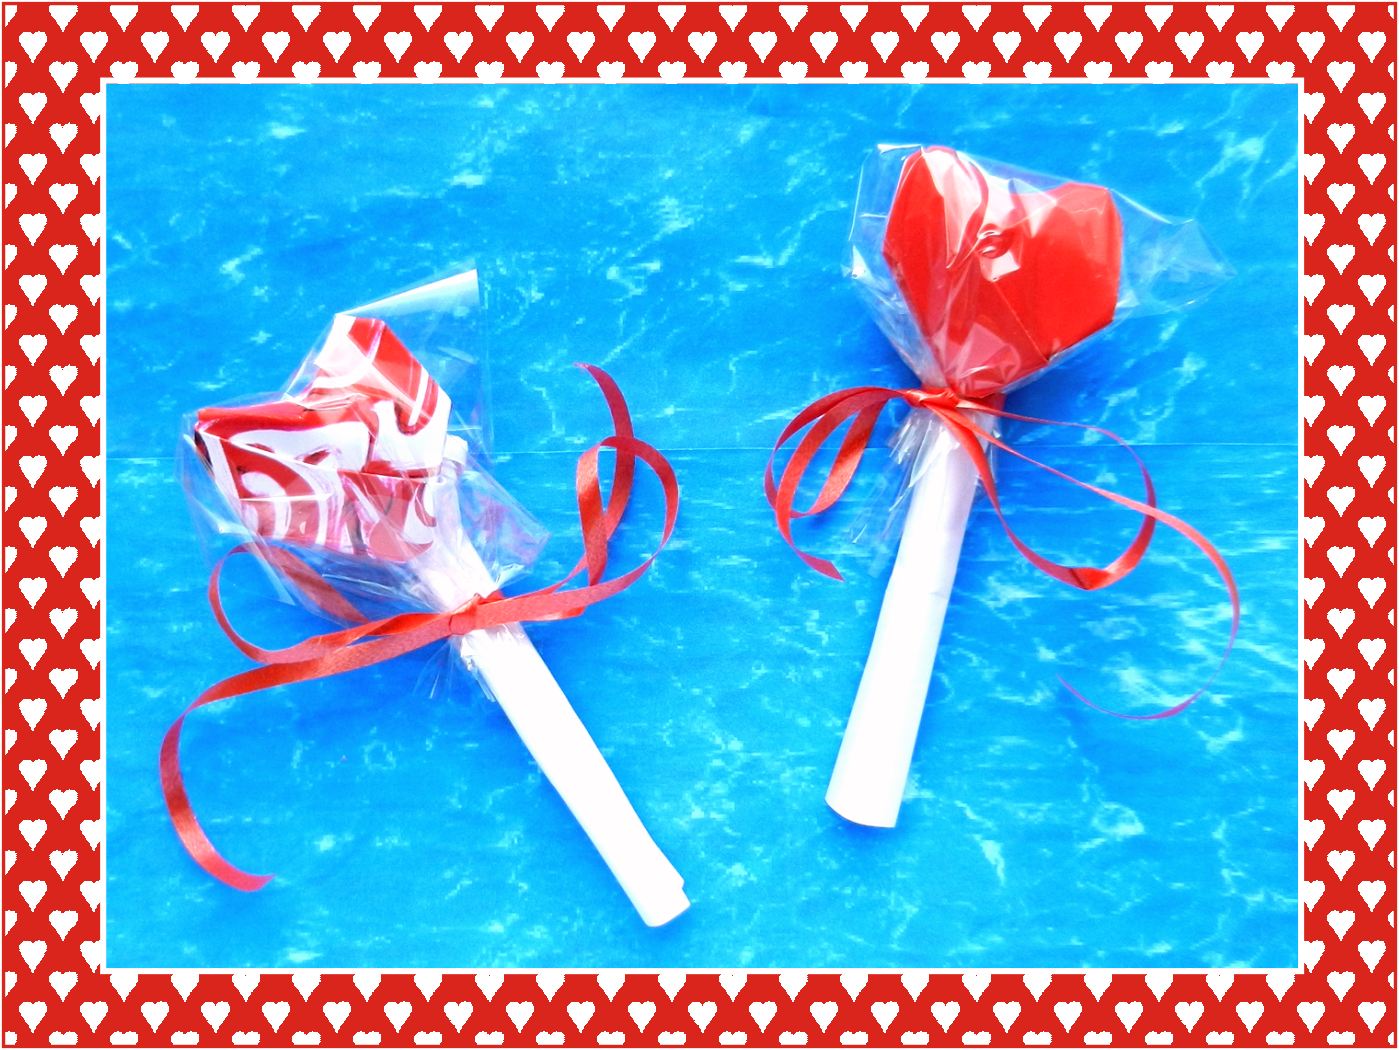 Printable card with origami heart shaped lollipops